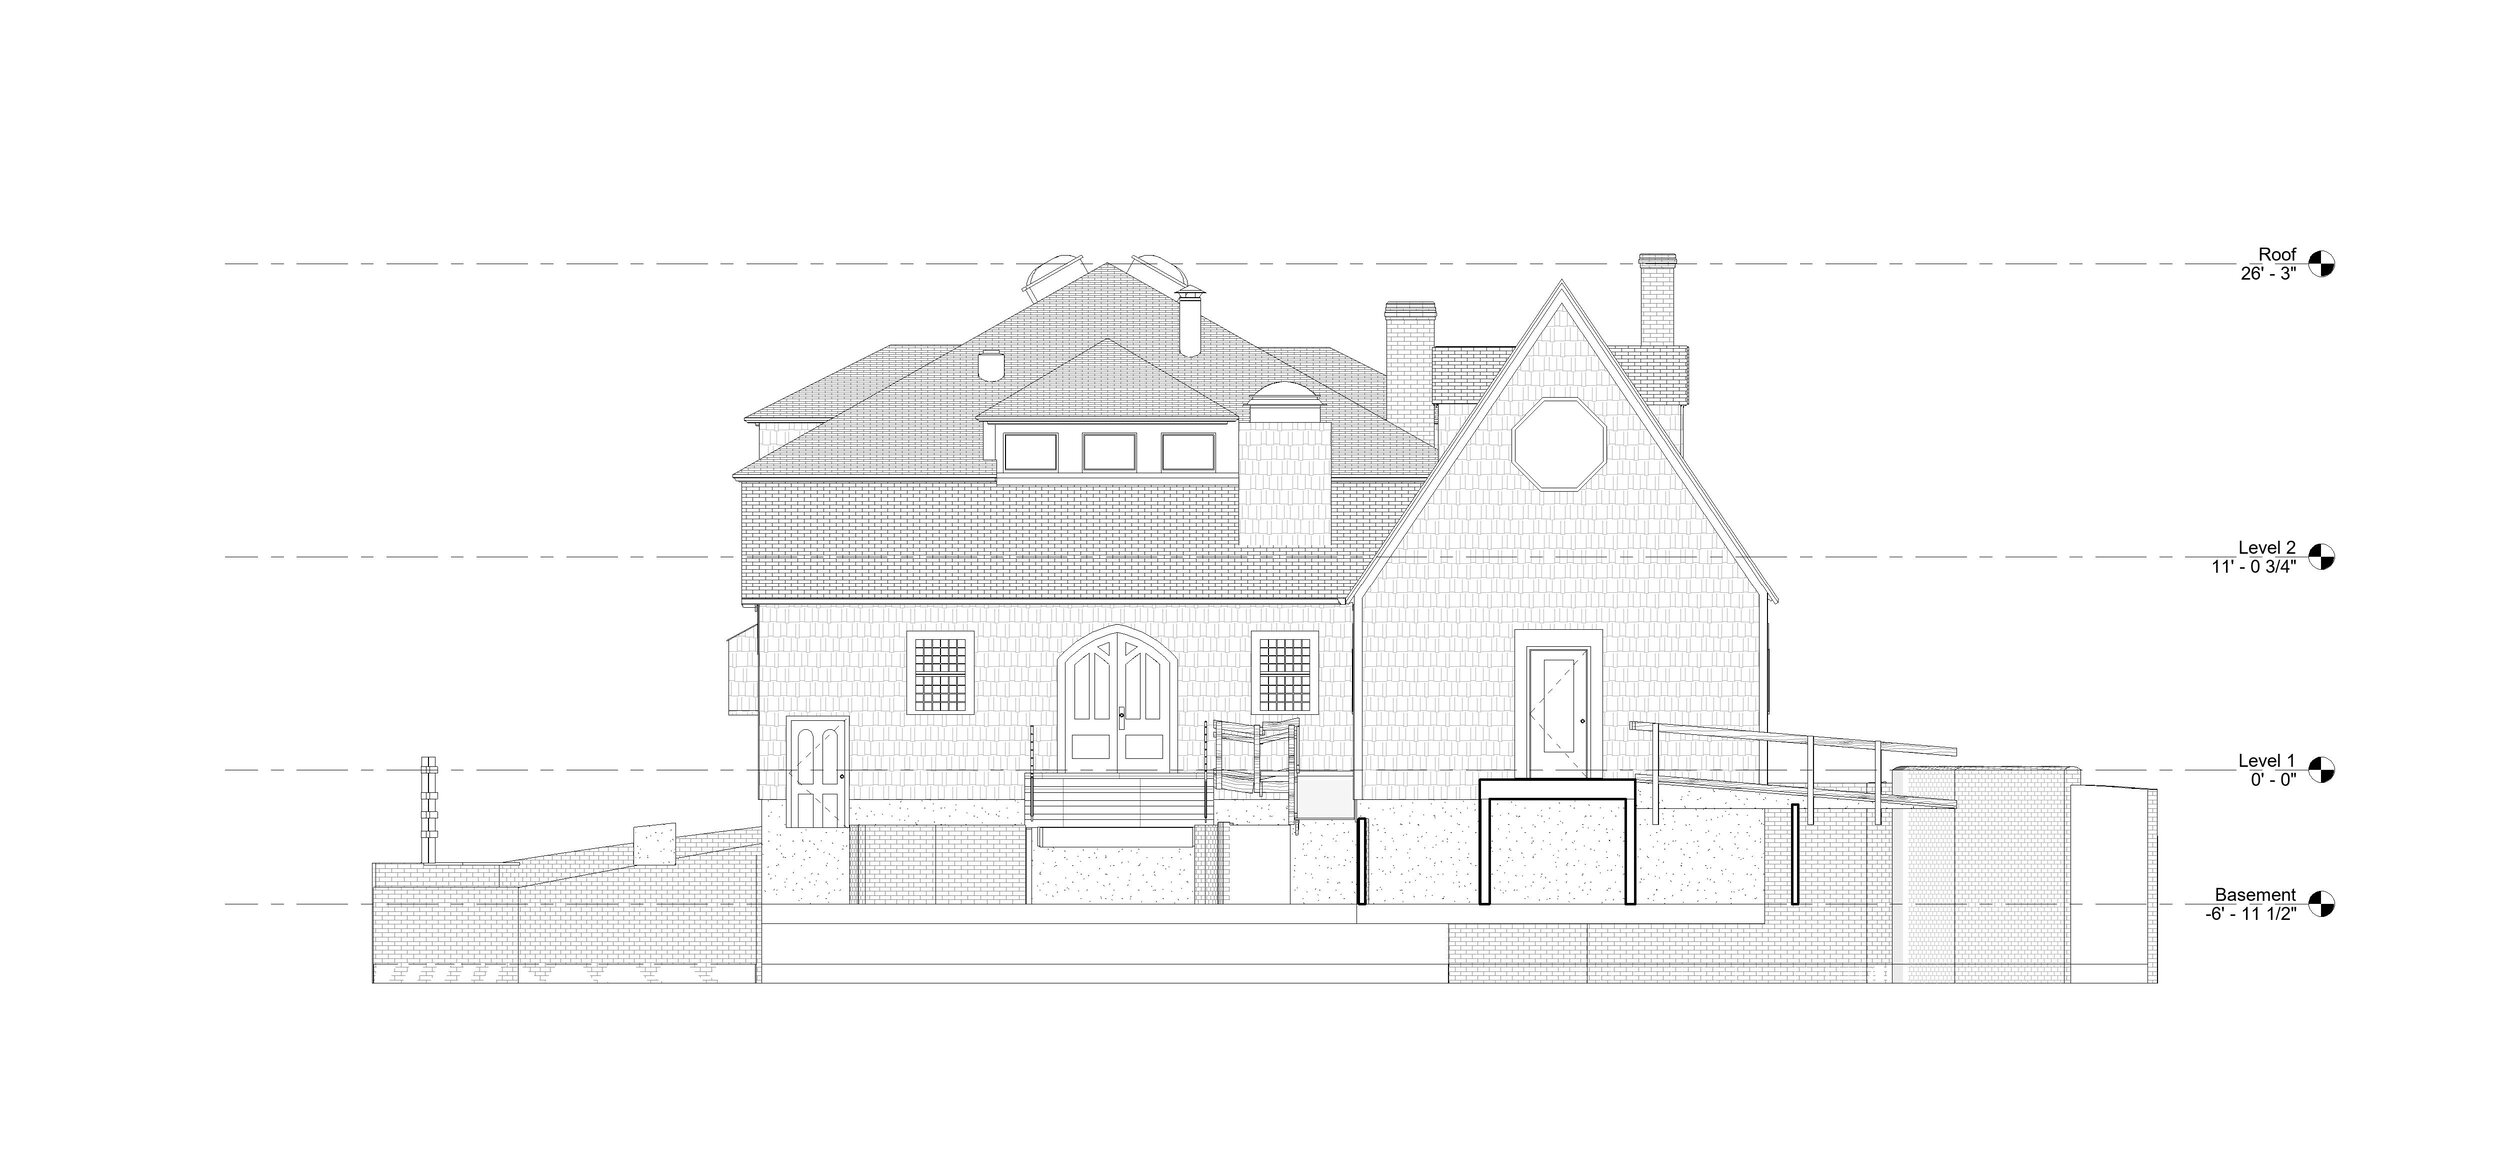 Front (south) Elevation hiddenwire.jpg